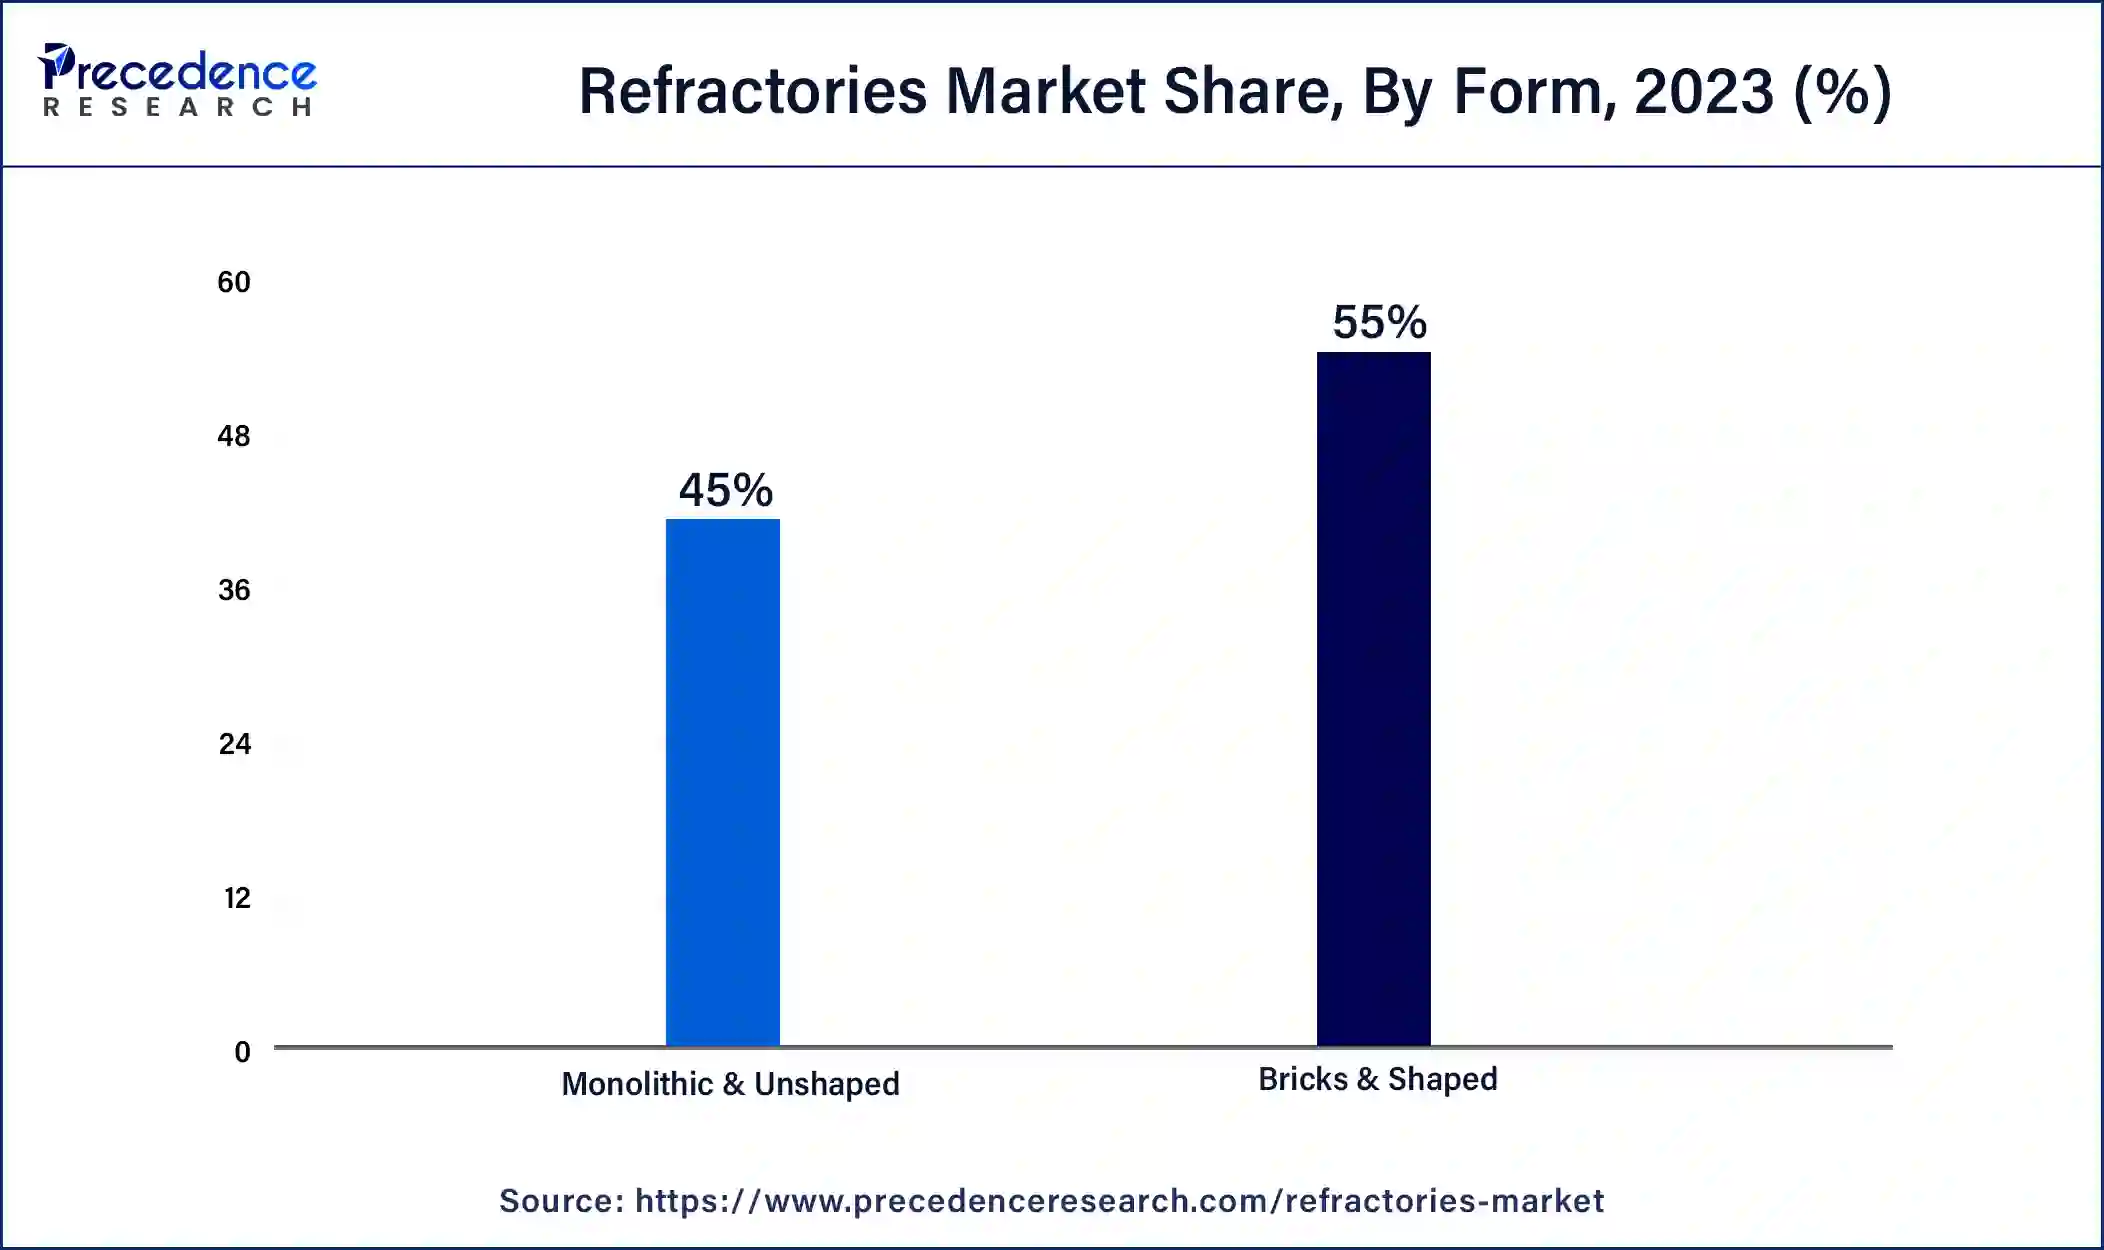 Refractories Market Share, By Form, 2023 (%)